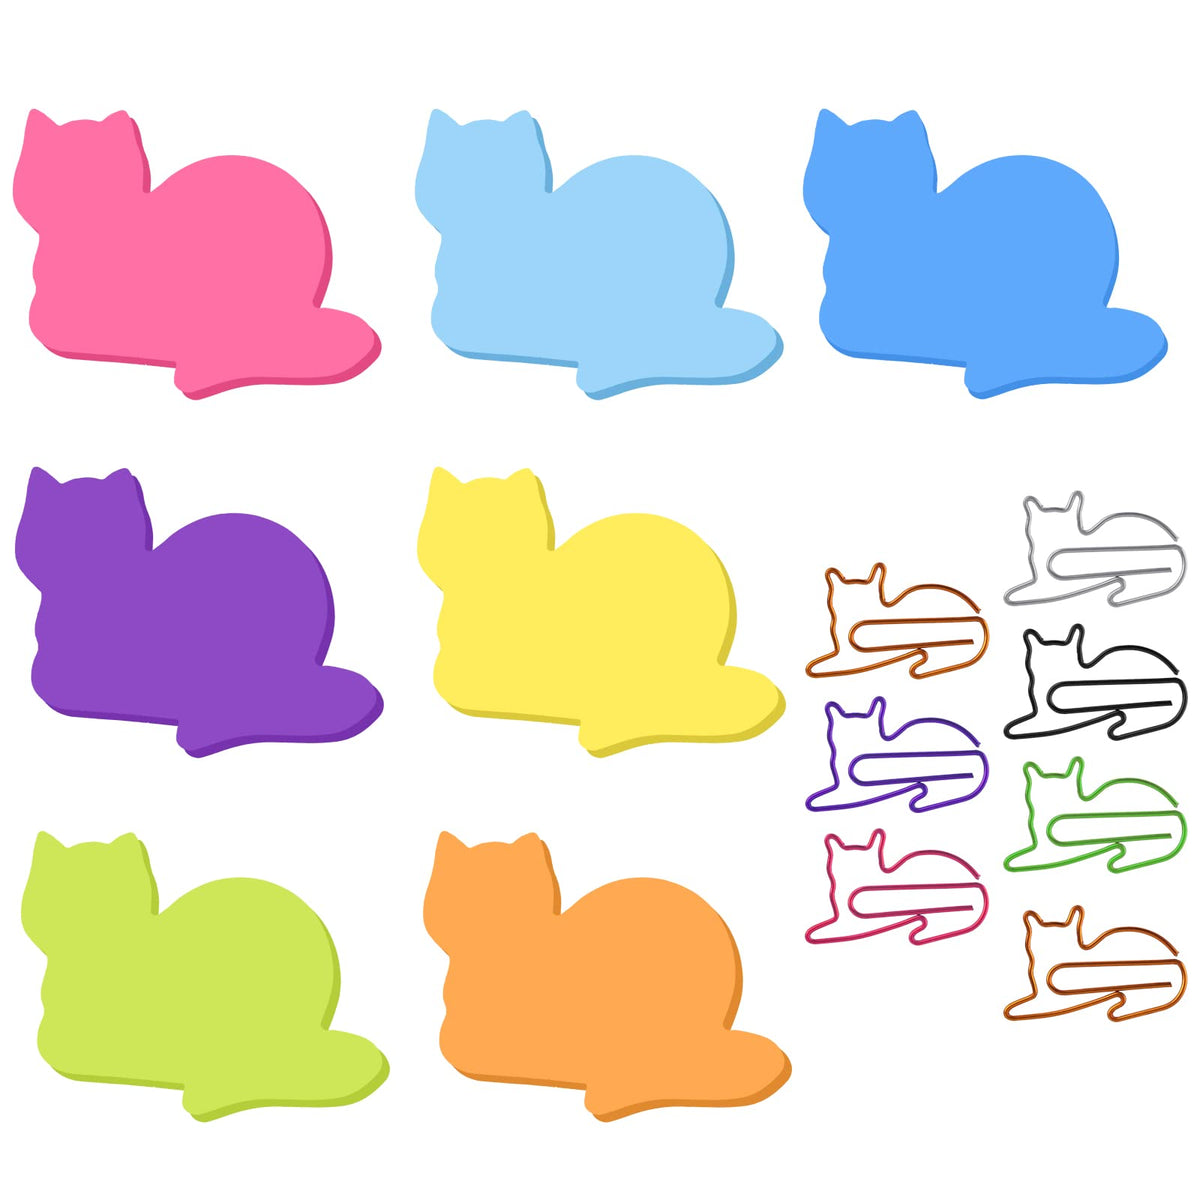 Cobee Cat Sticky Notes with Paper Clips, 7 Pack Cute Self-Stick Memo Note Pads Sticky Pad Cat Paper Clips Index Tabs (B)